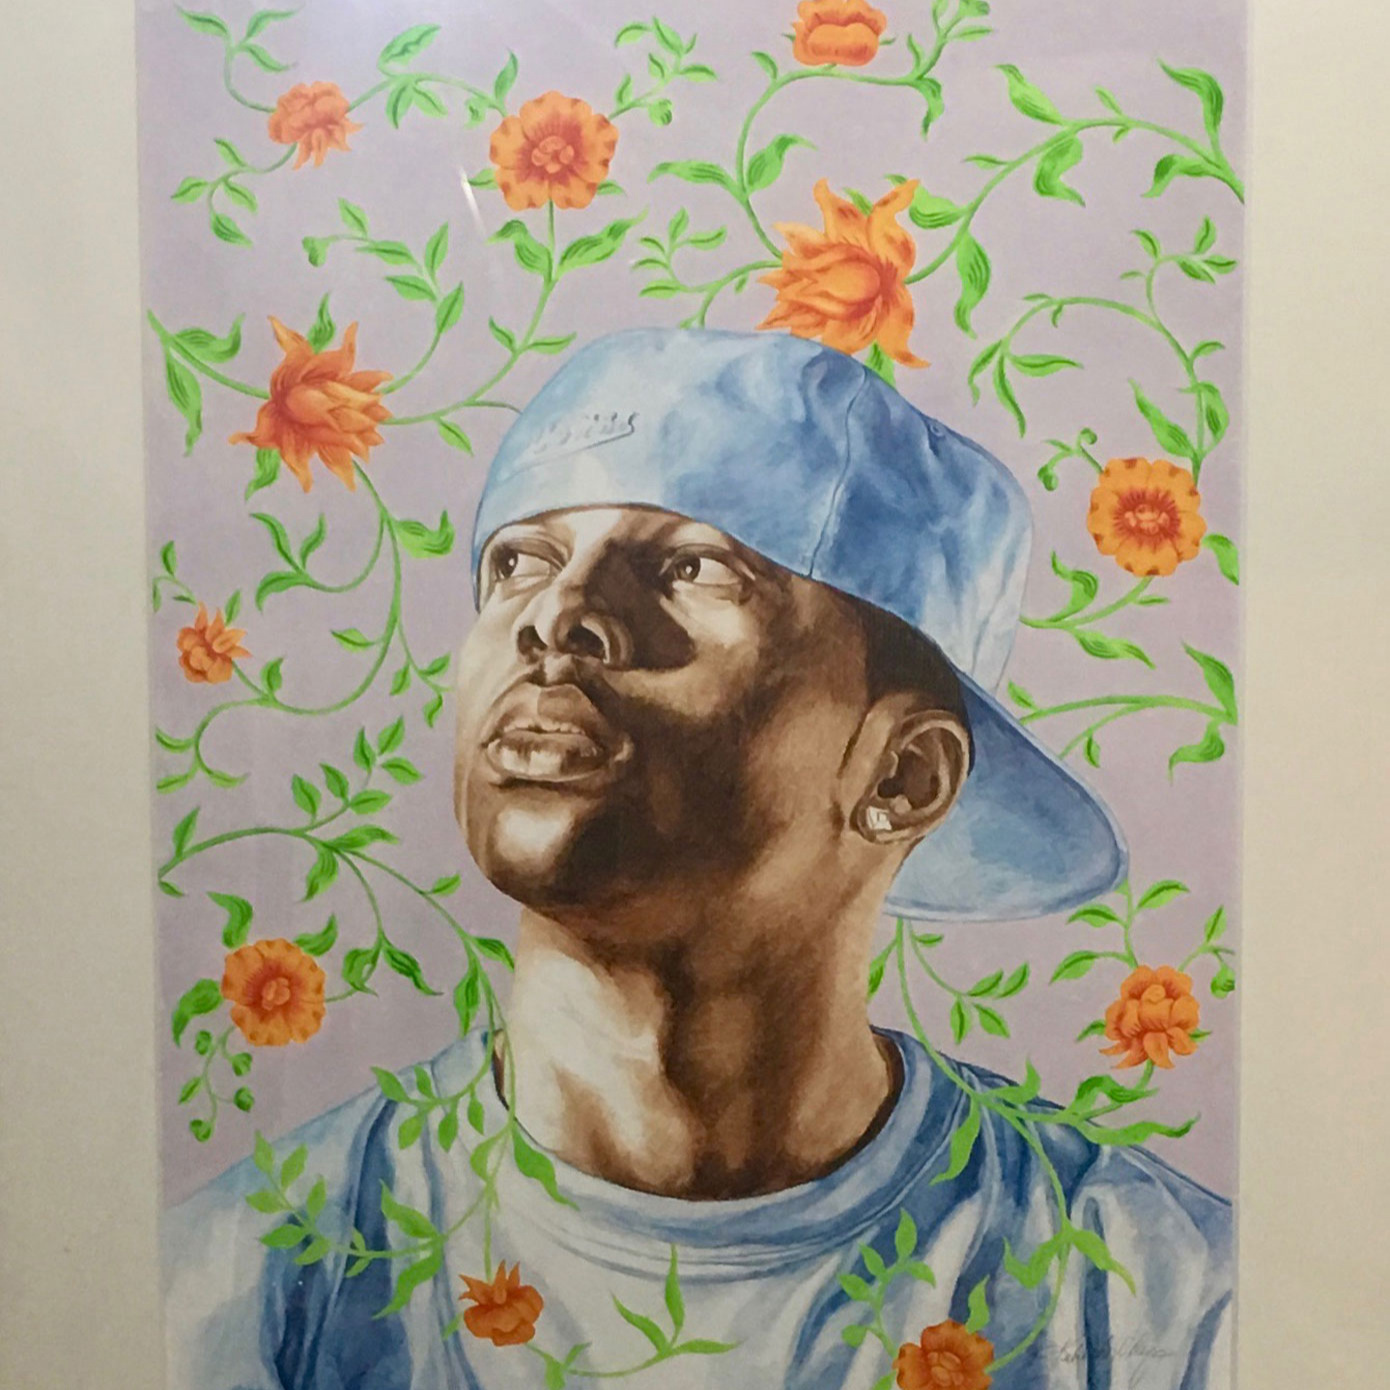 A Kehinde Wiley Work Changed Collector Notoya Green's Outlook on Art